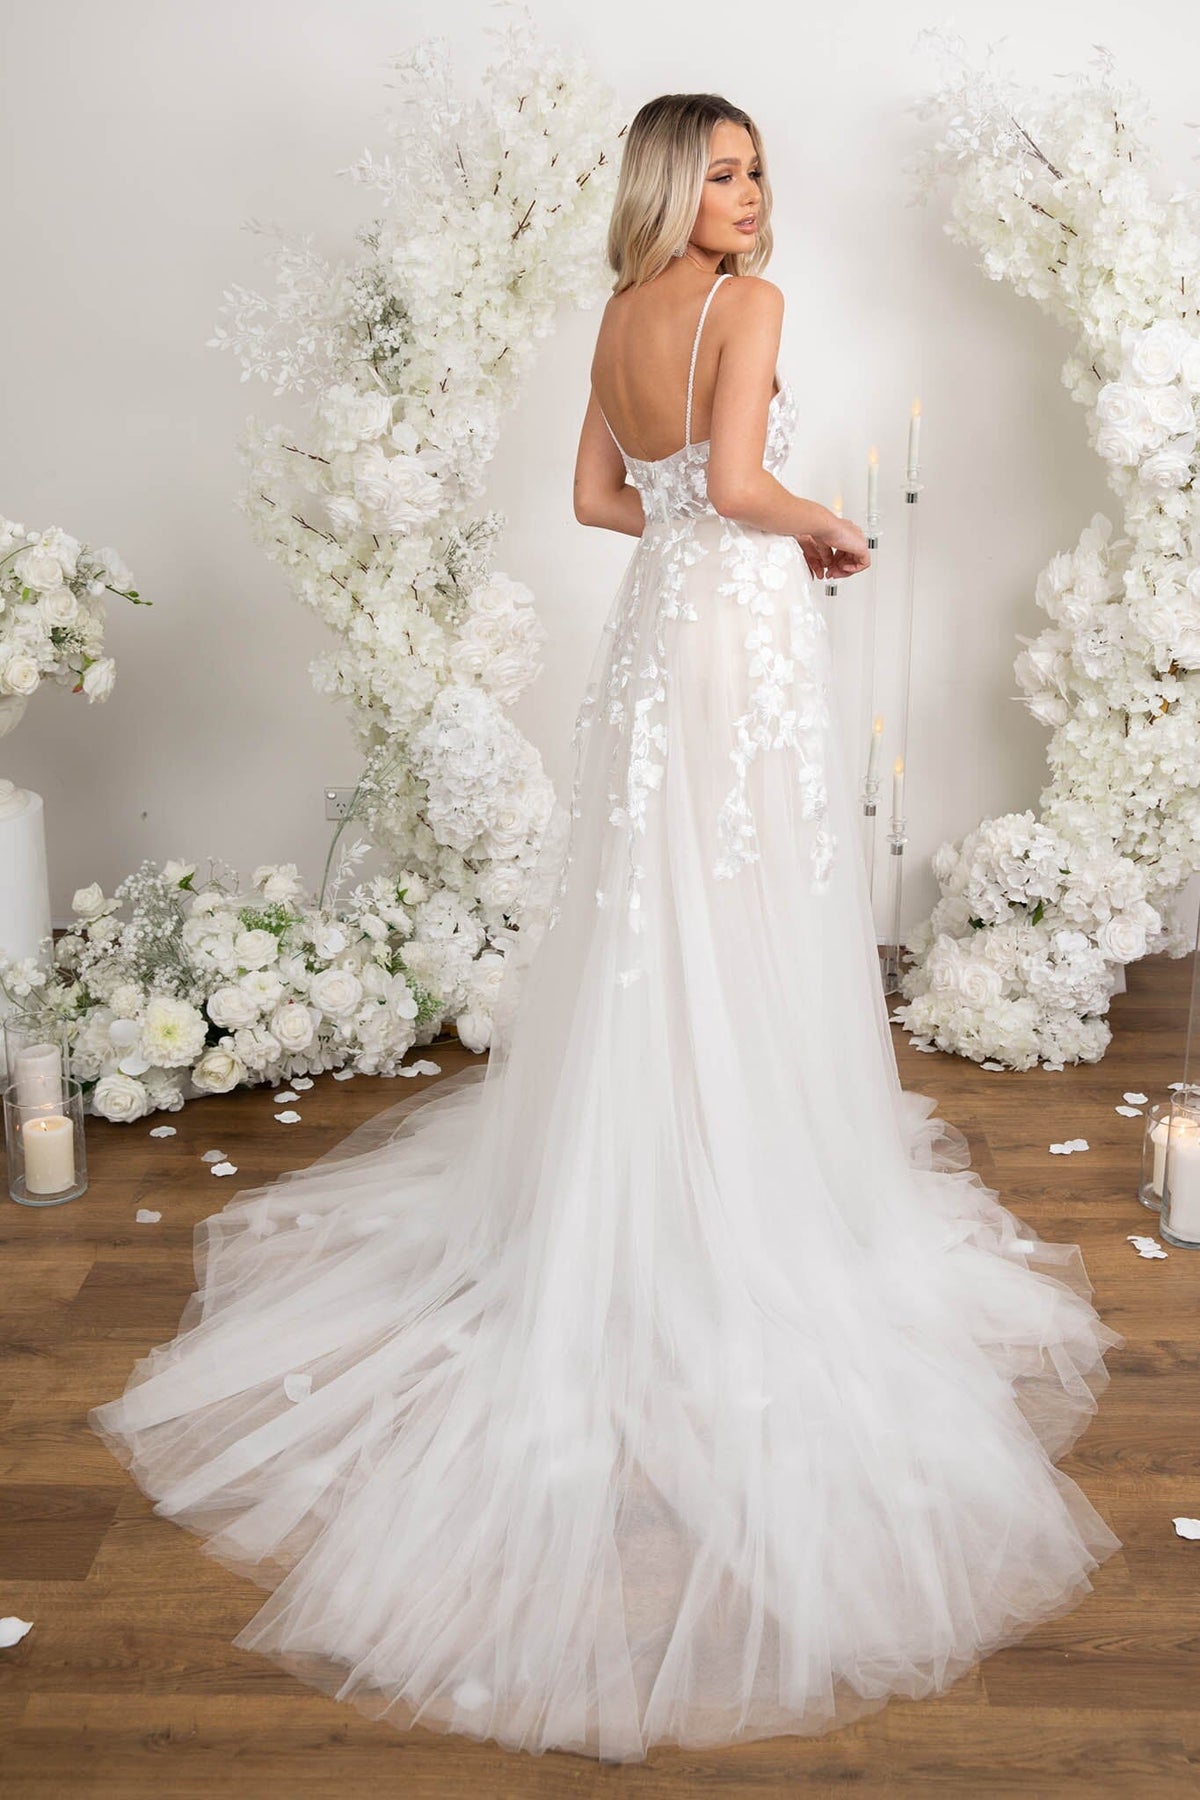 Back Image of Ivory White Romantic Tull A-line Wedding Dress with Hand-Sewn Floral Lace Motifs, Pearl Beaded Spaghetti Straps, V Neck, Full Airy A-line Skirt and Chapel Train